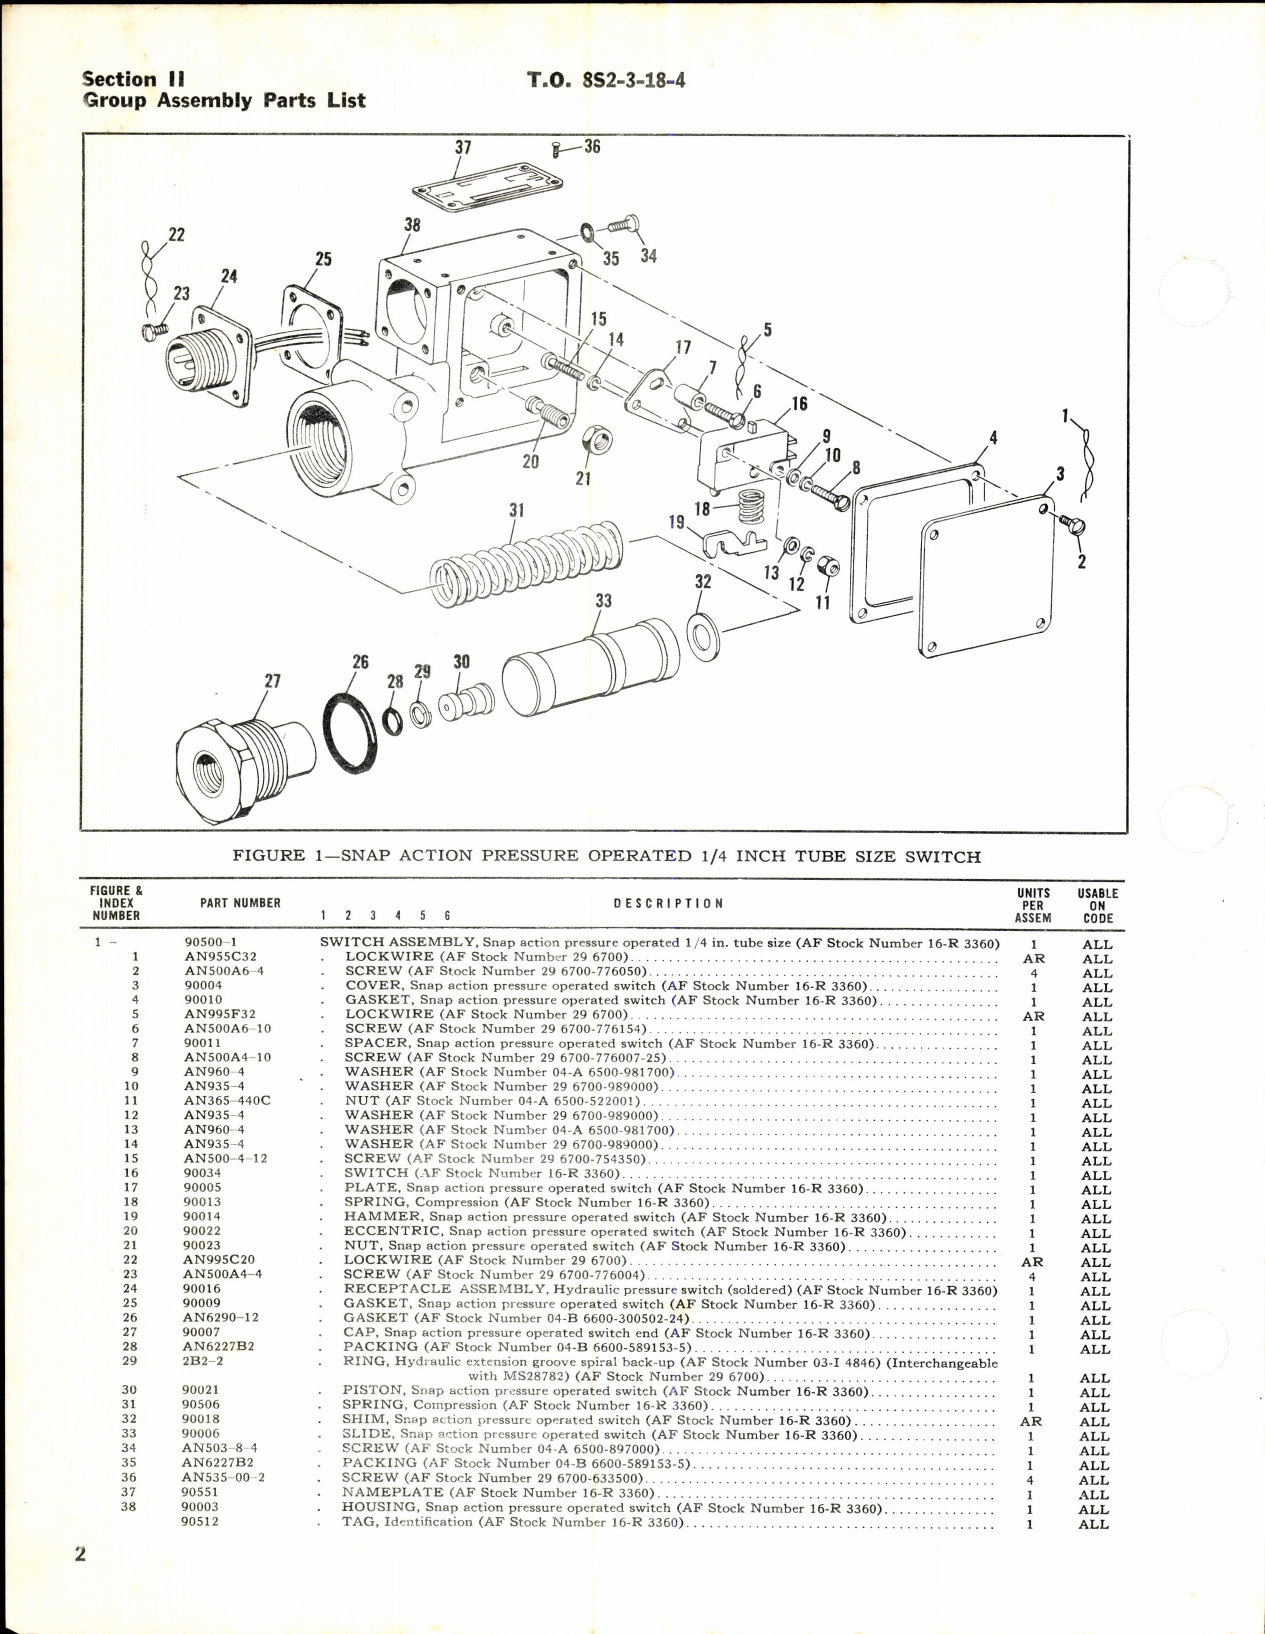 Sample page 2 from AirCorps Library document: Parts Breakdown for Hydraulic & Pneumatic Pressure Switch